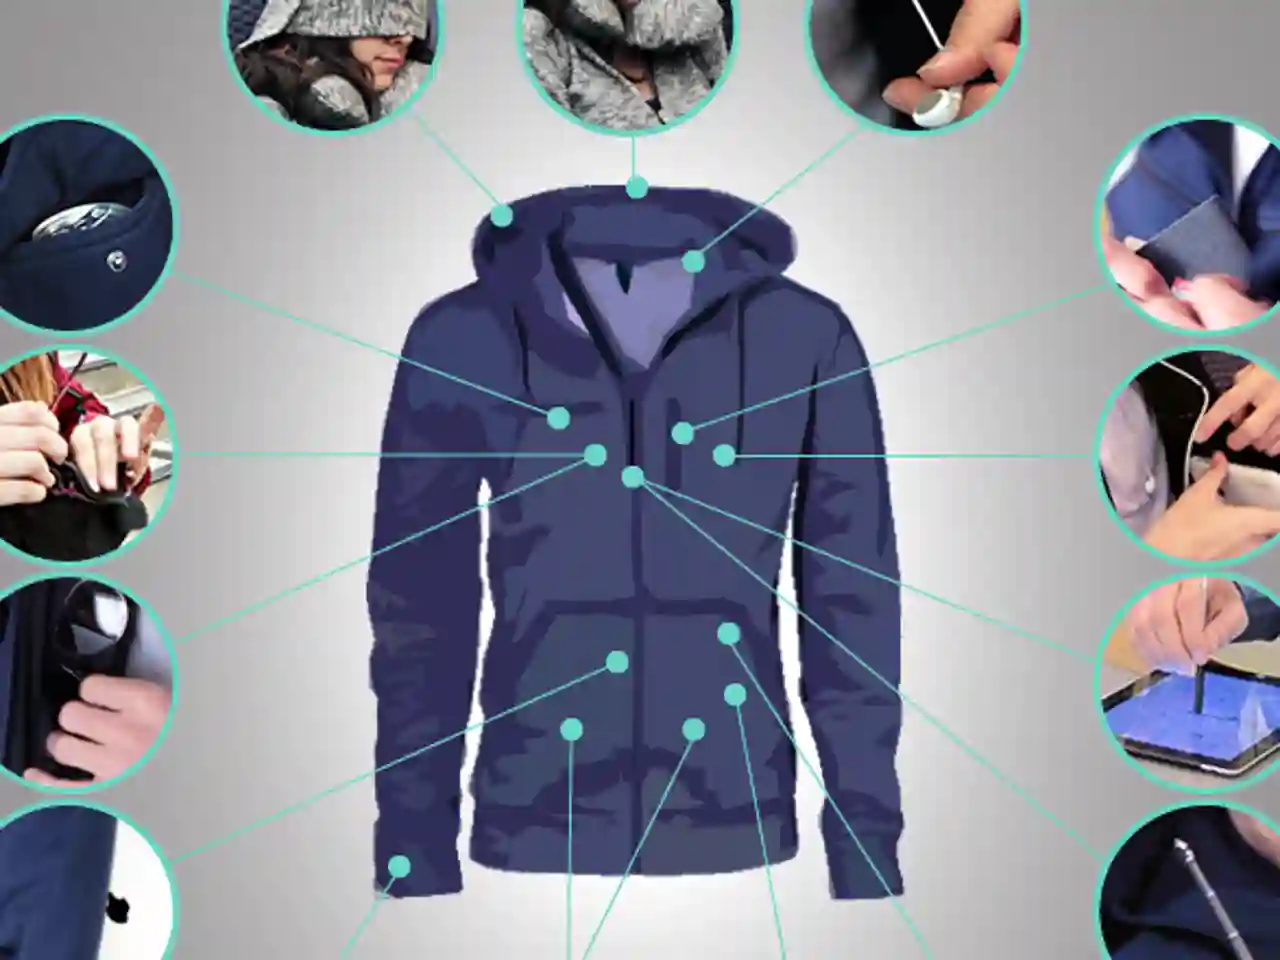 Multifunctional Travel Jacket with Built-In Features